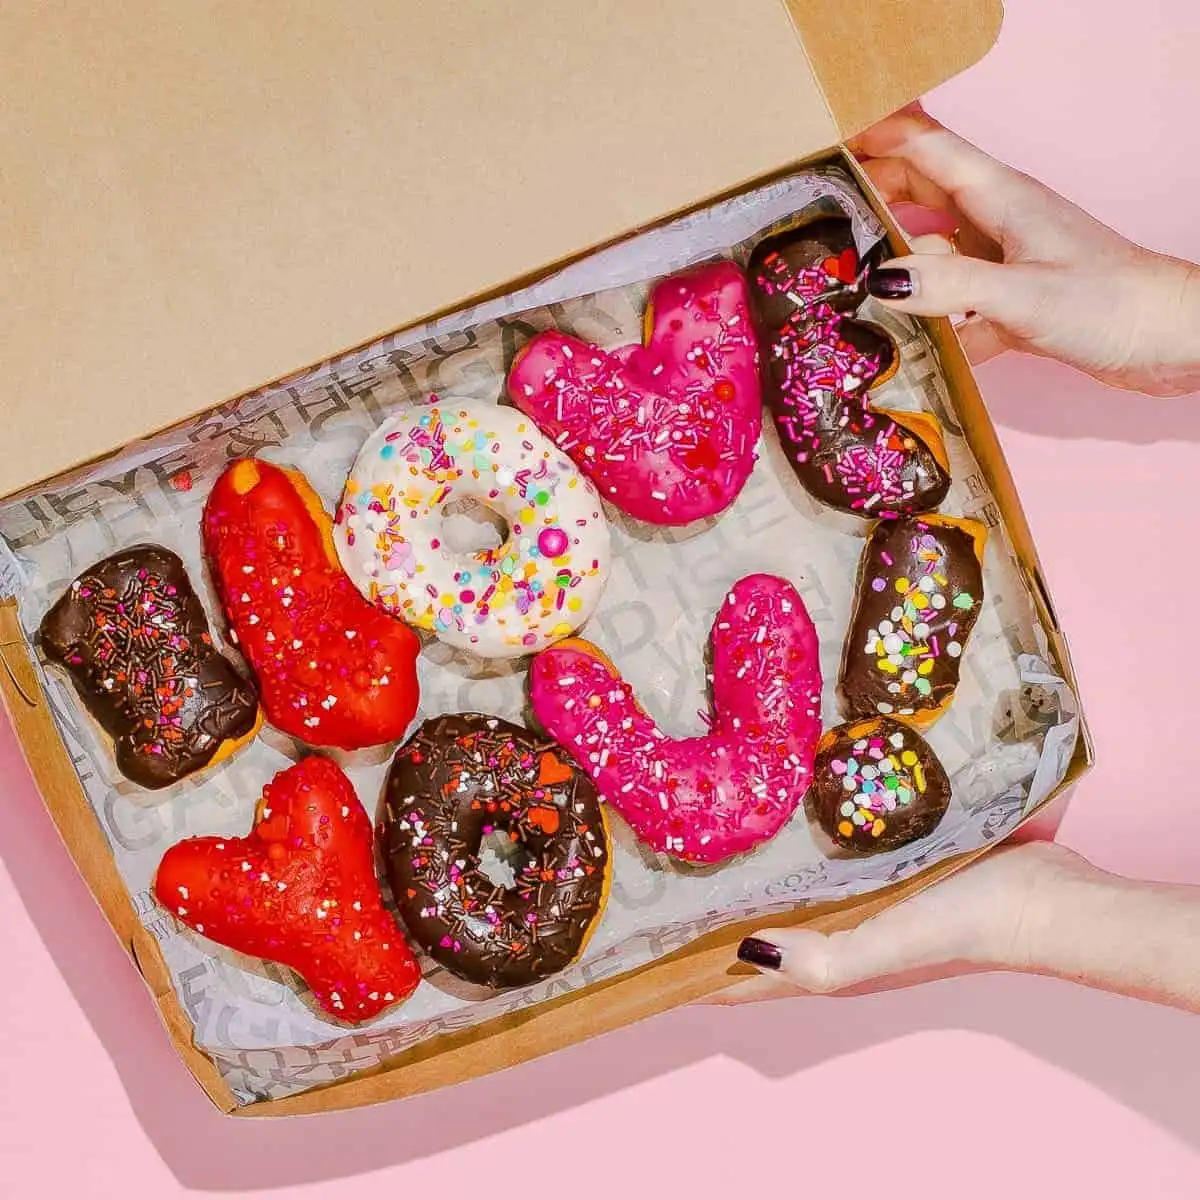 'I Love You' Donuts